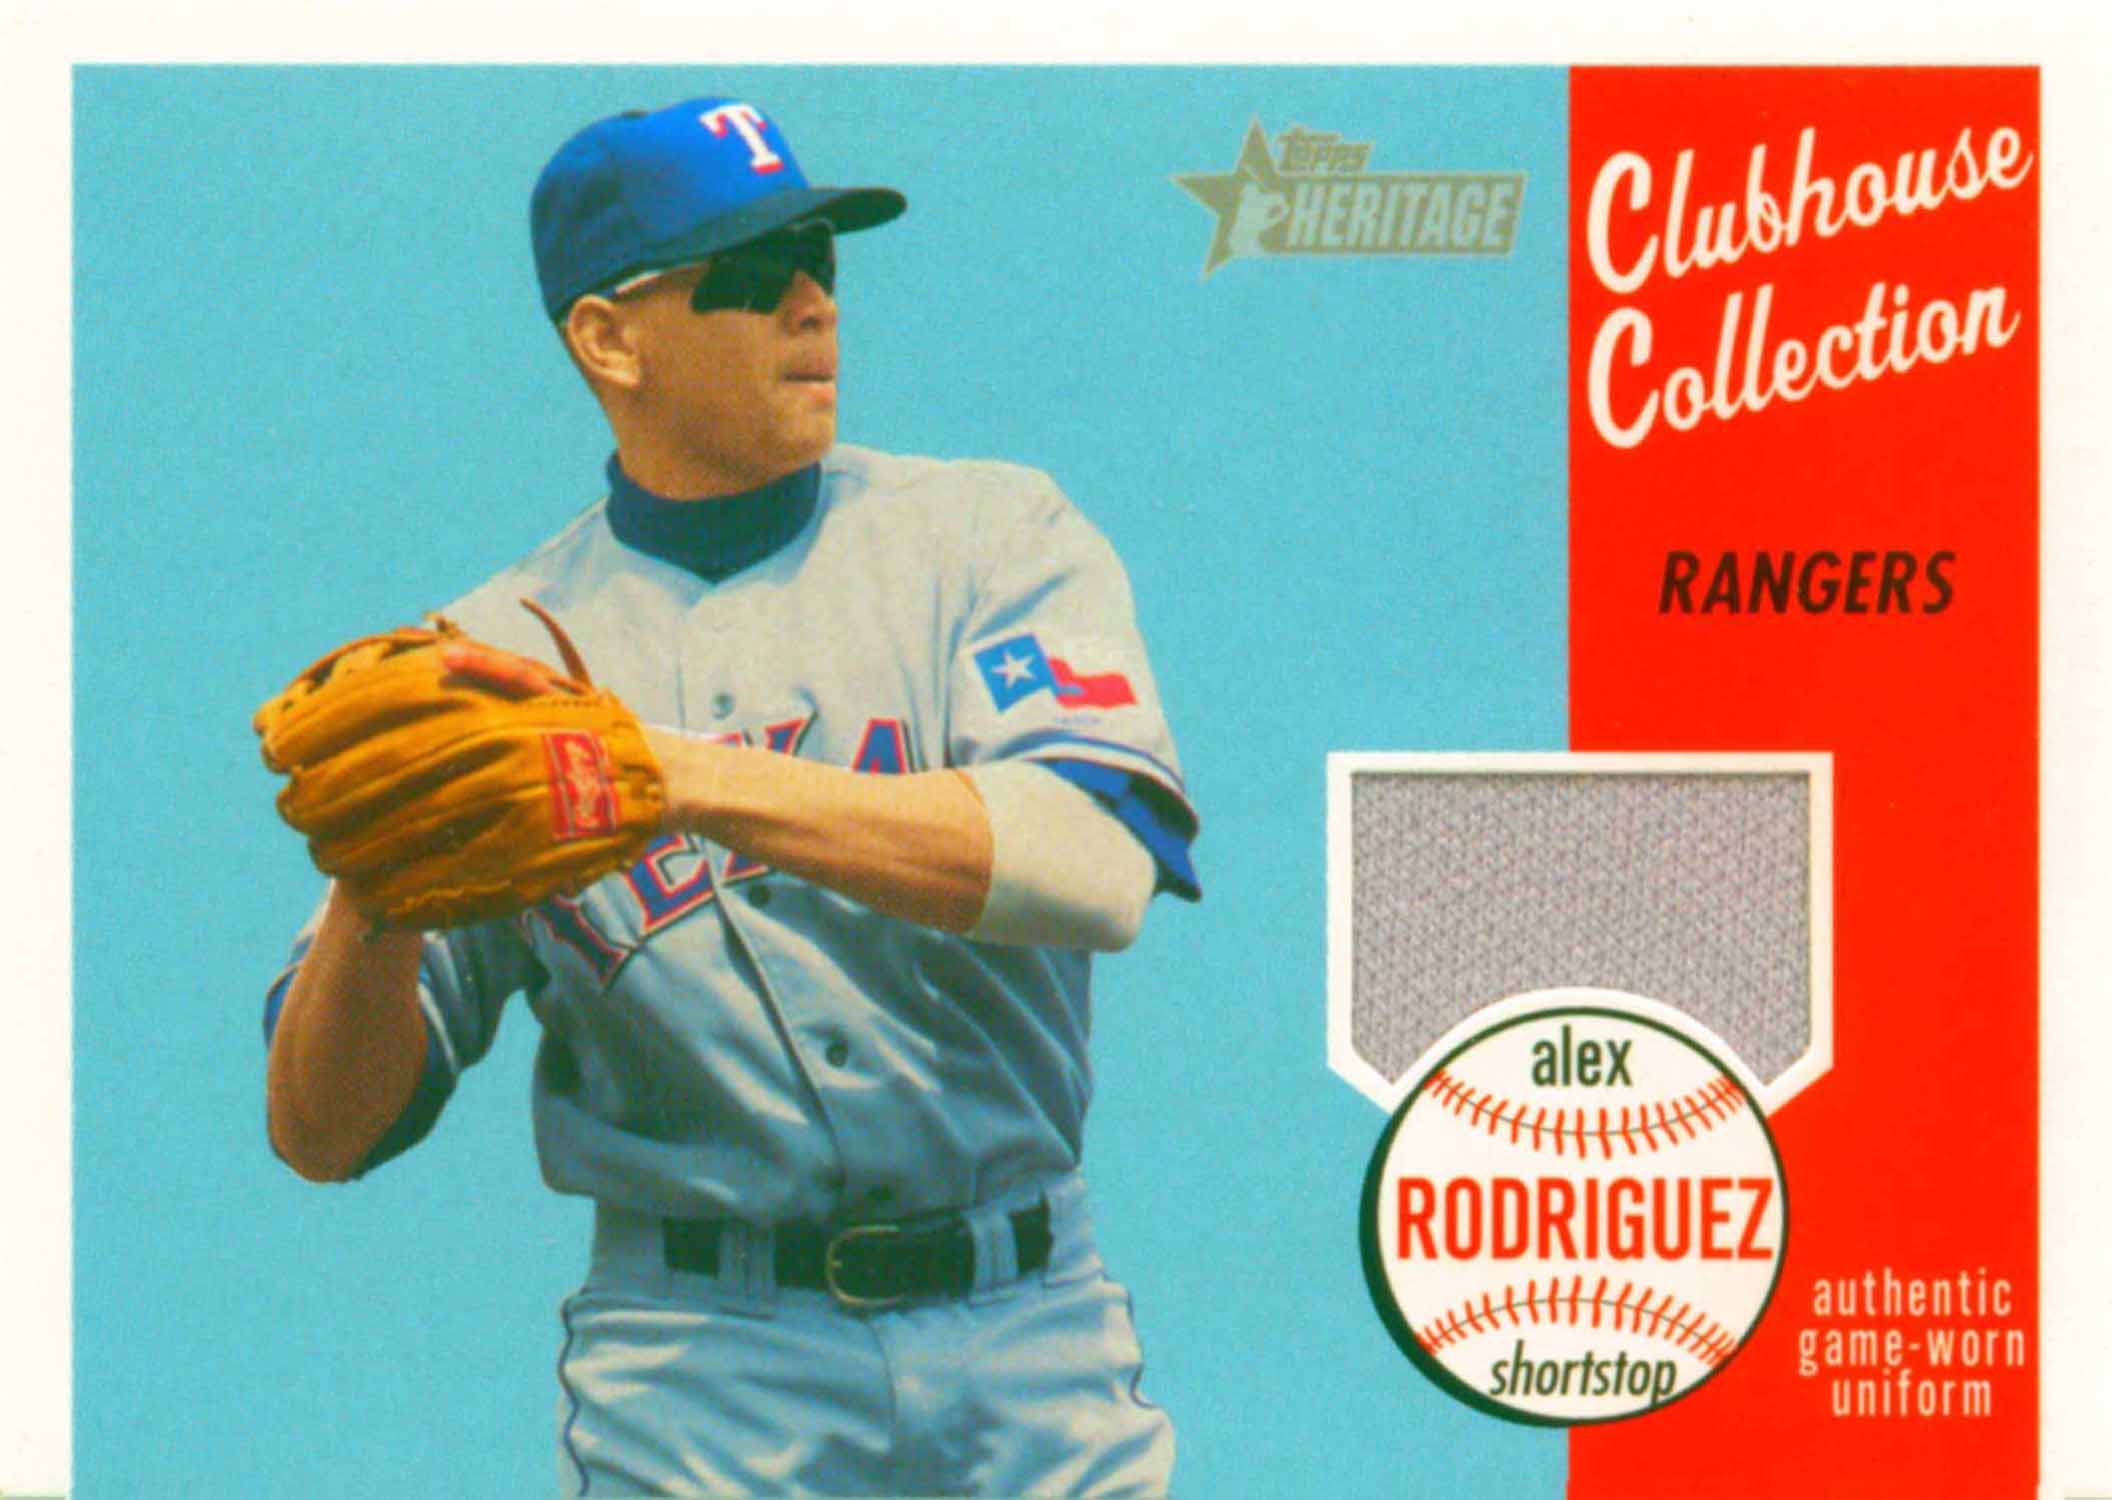 2003 Topps Heritage Clubhouse Collection Relics Uniform